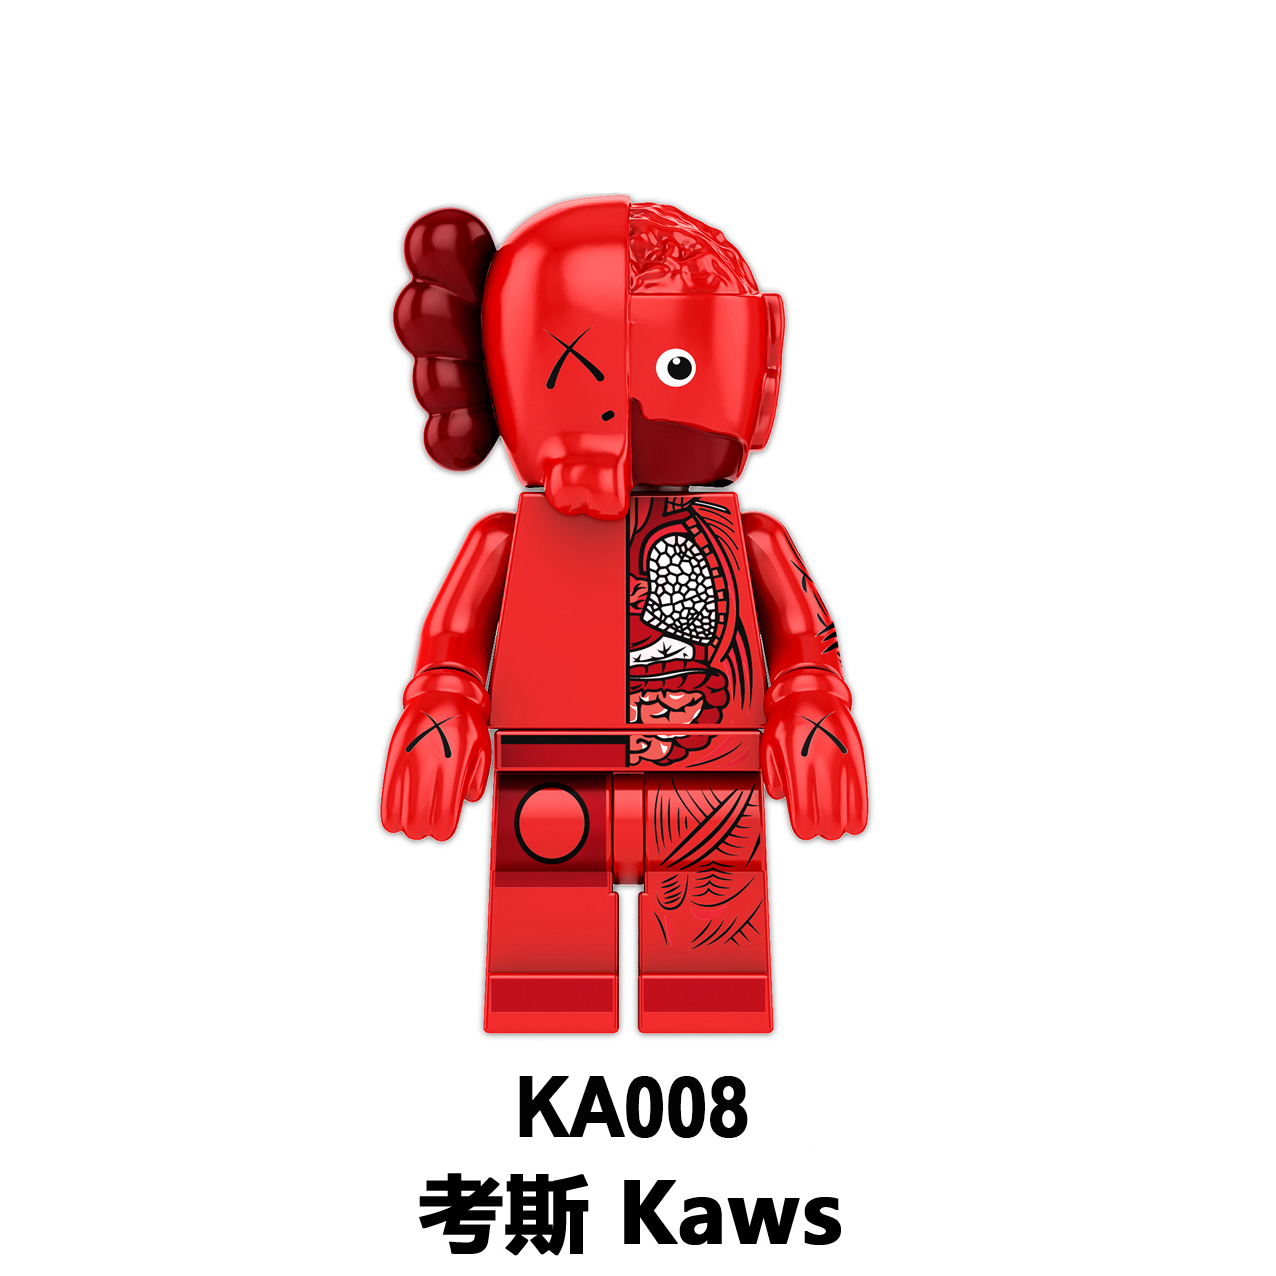 KA001 KA002 KA003 KA004 KA005 KA006 KA007 KA008 KA101 Kaws Gloomy Bear Popobe Cartoon Series Characters Toys Building Block for Kids Gifts 